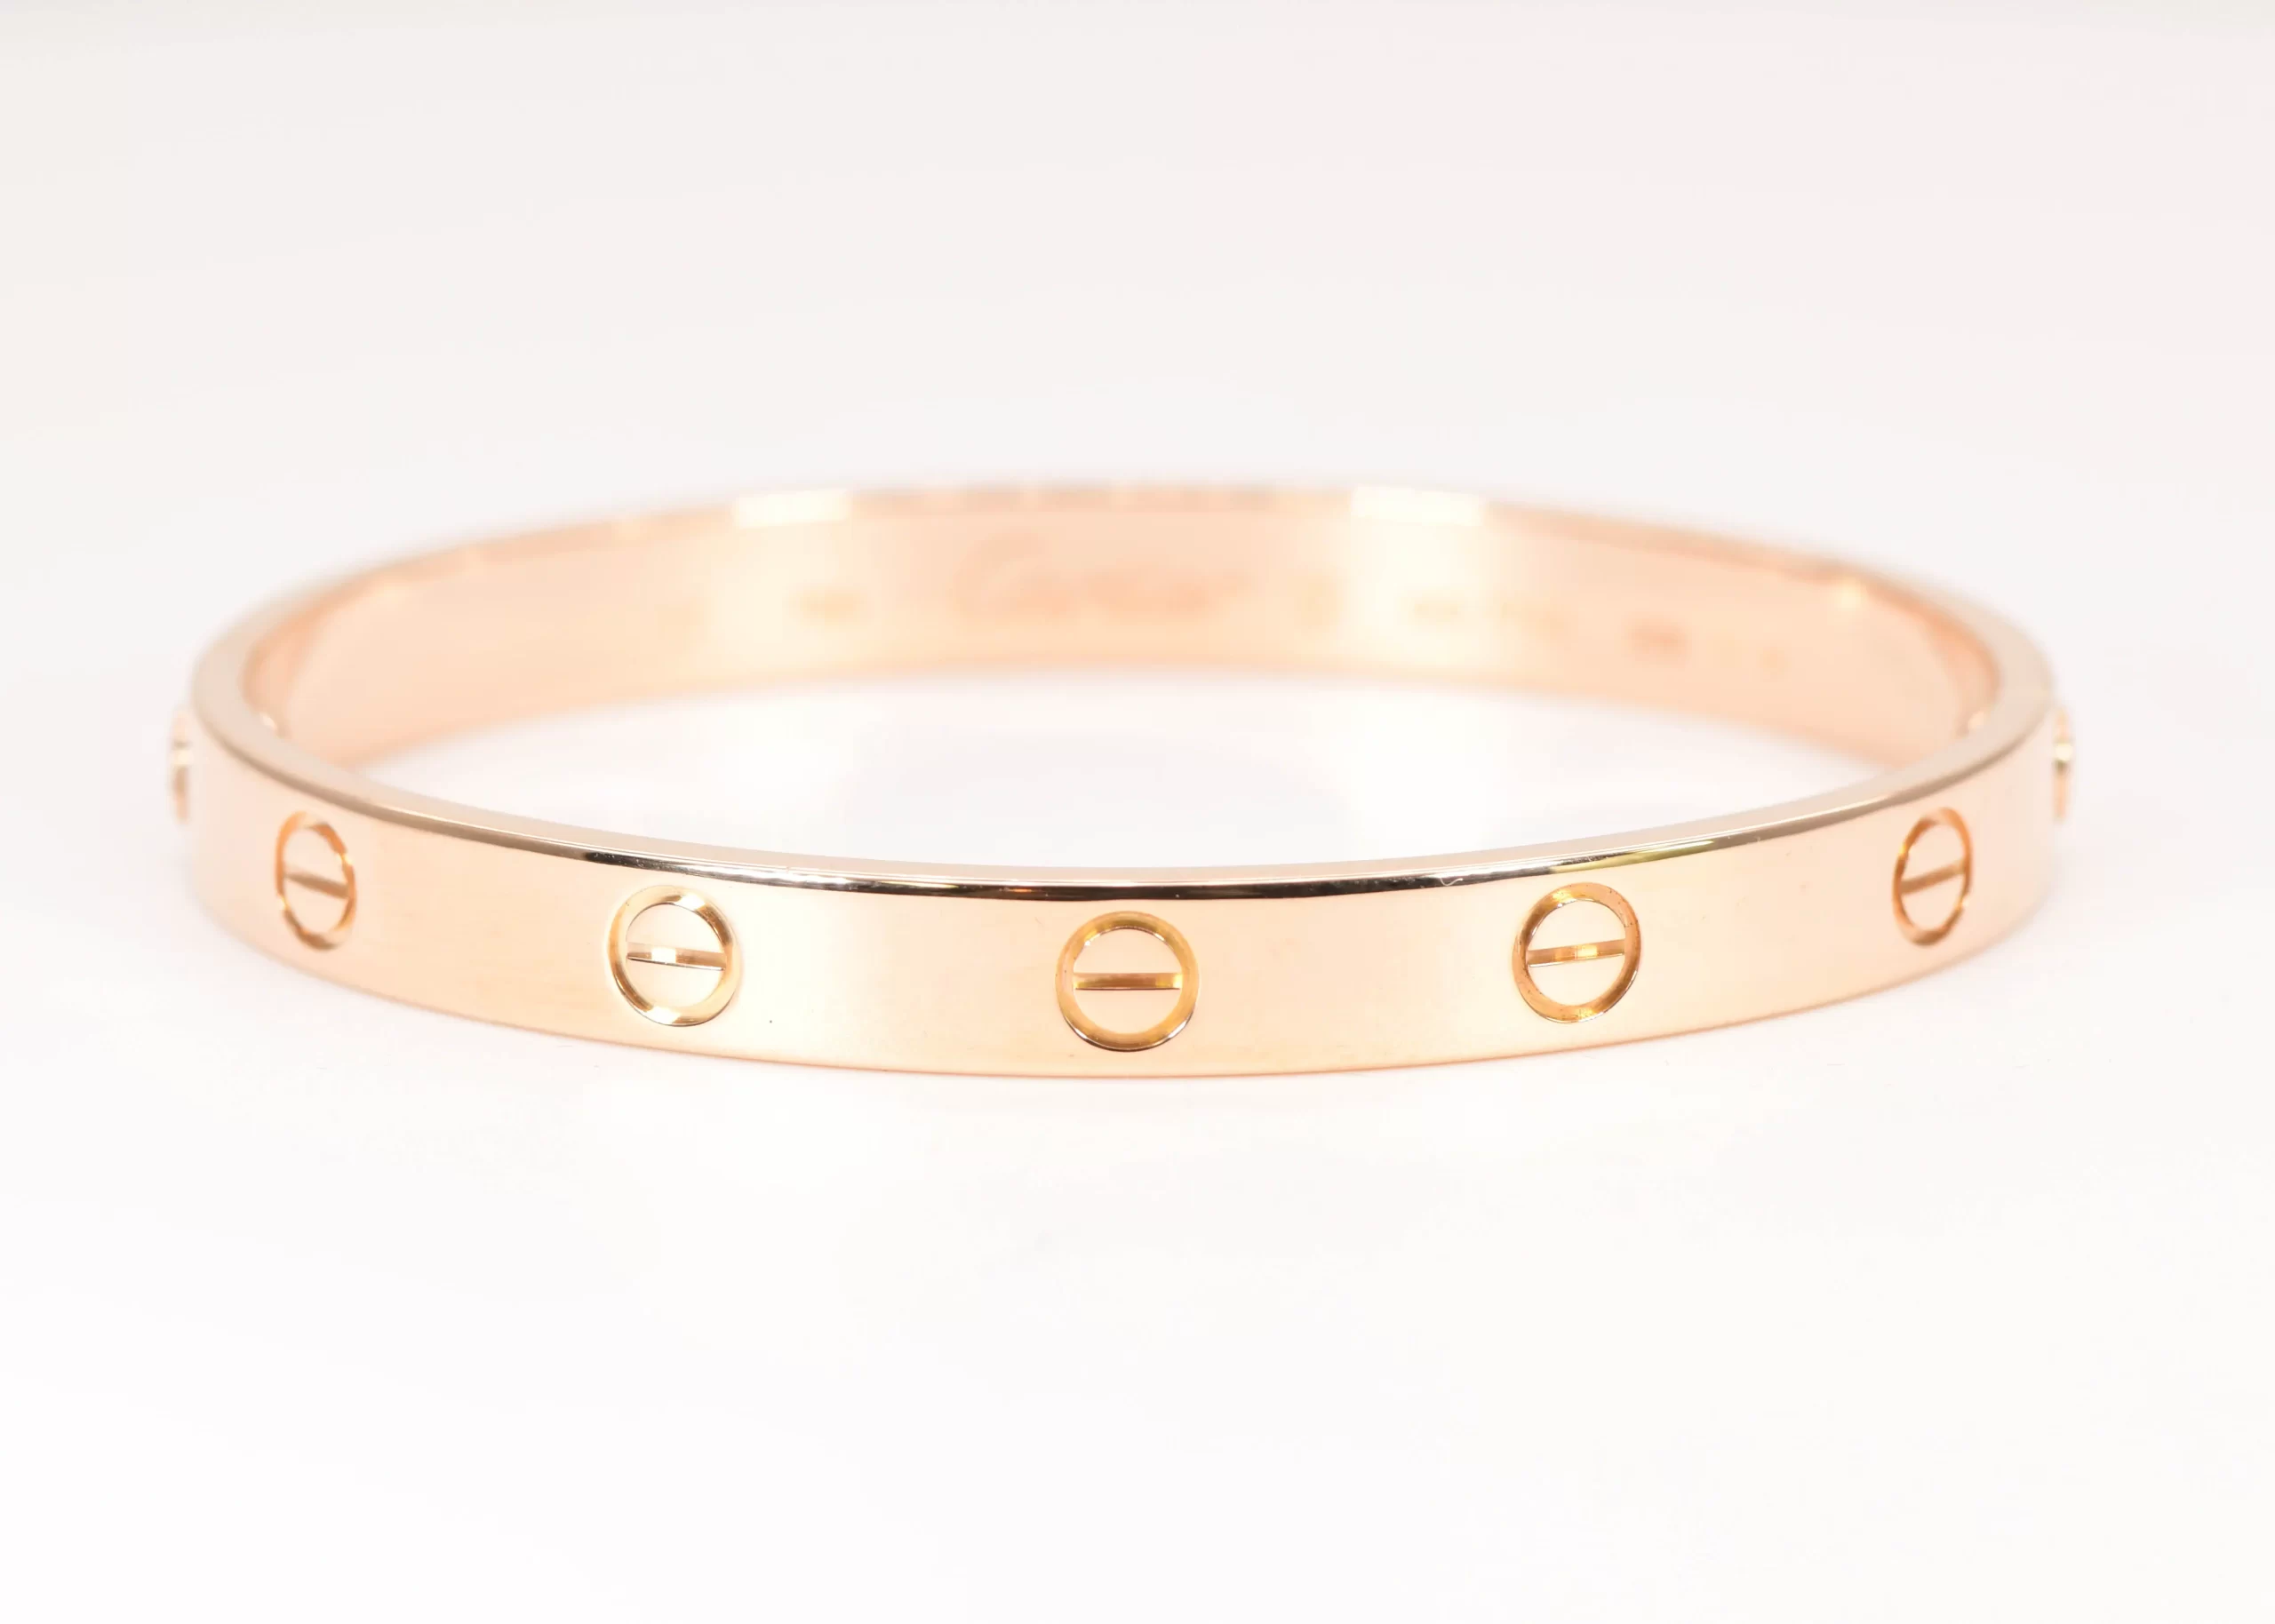 Solid 18k gold Cartier Love Bracelet replica, small model, weight 18-20g. –  International Brand Replica Jewelry for Sale, Make in Real 18k Gold and  Diamonds, the Same As the Original.